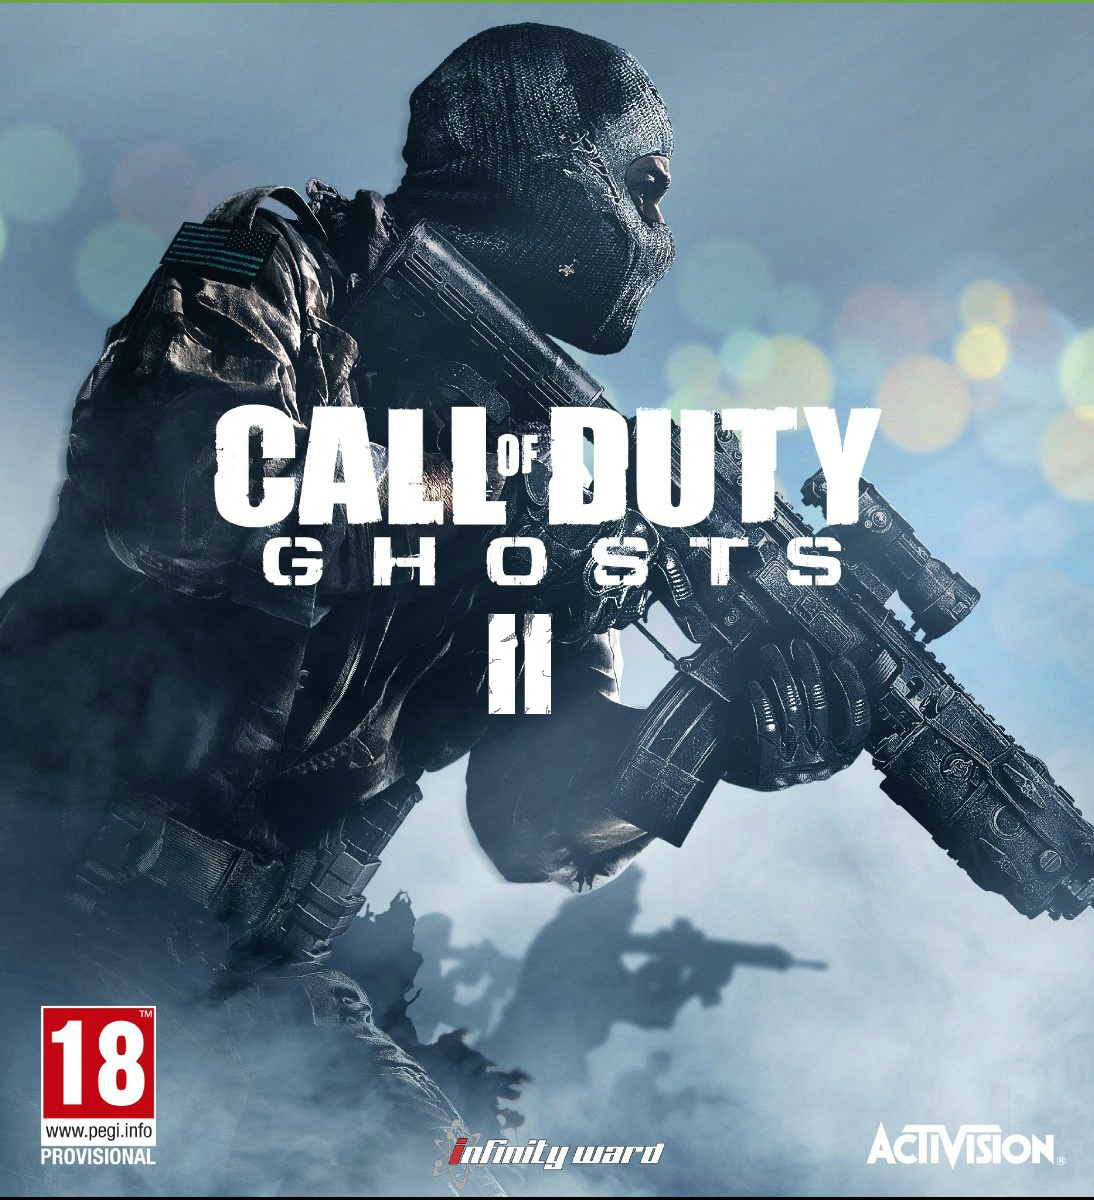 cod ghosts 2 download free